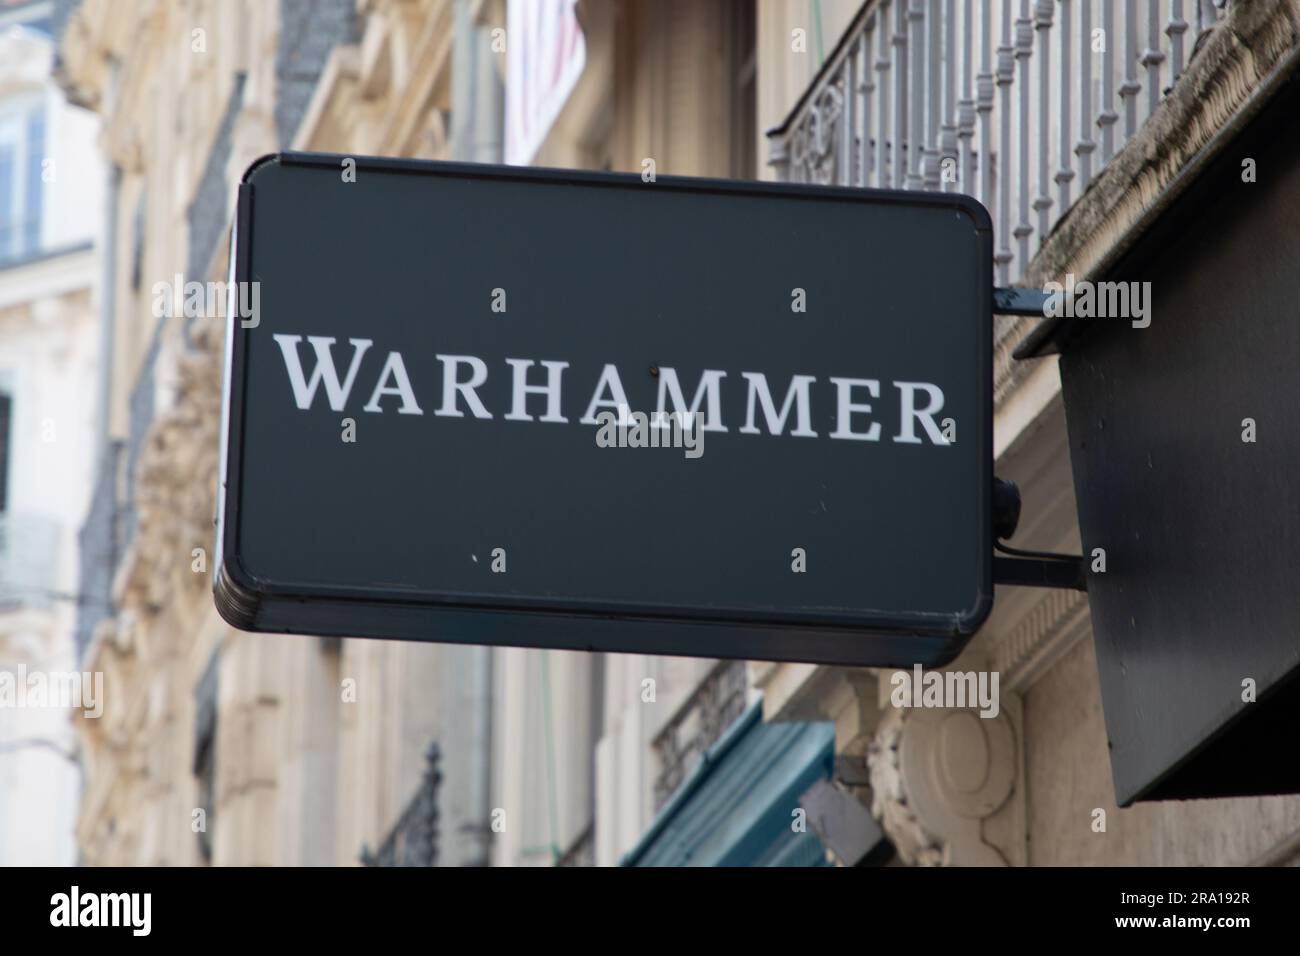 annecy , France - 06 16 2023 : Warhammer text sign facade store and logo brand wall shop specialist retail toys chain fantasy board games Stock Photo